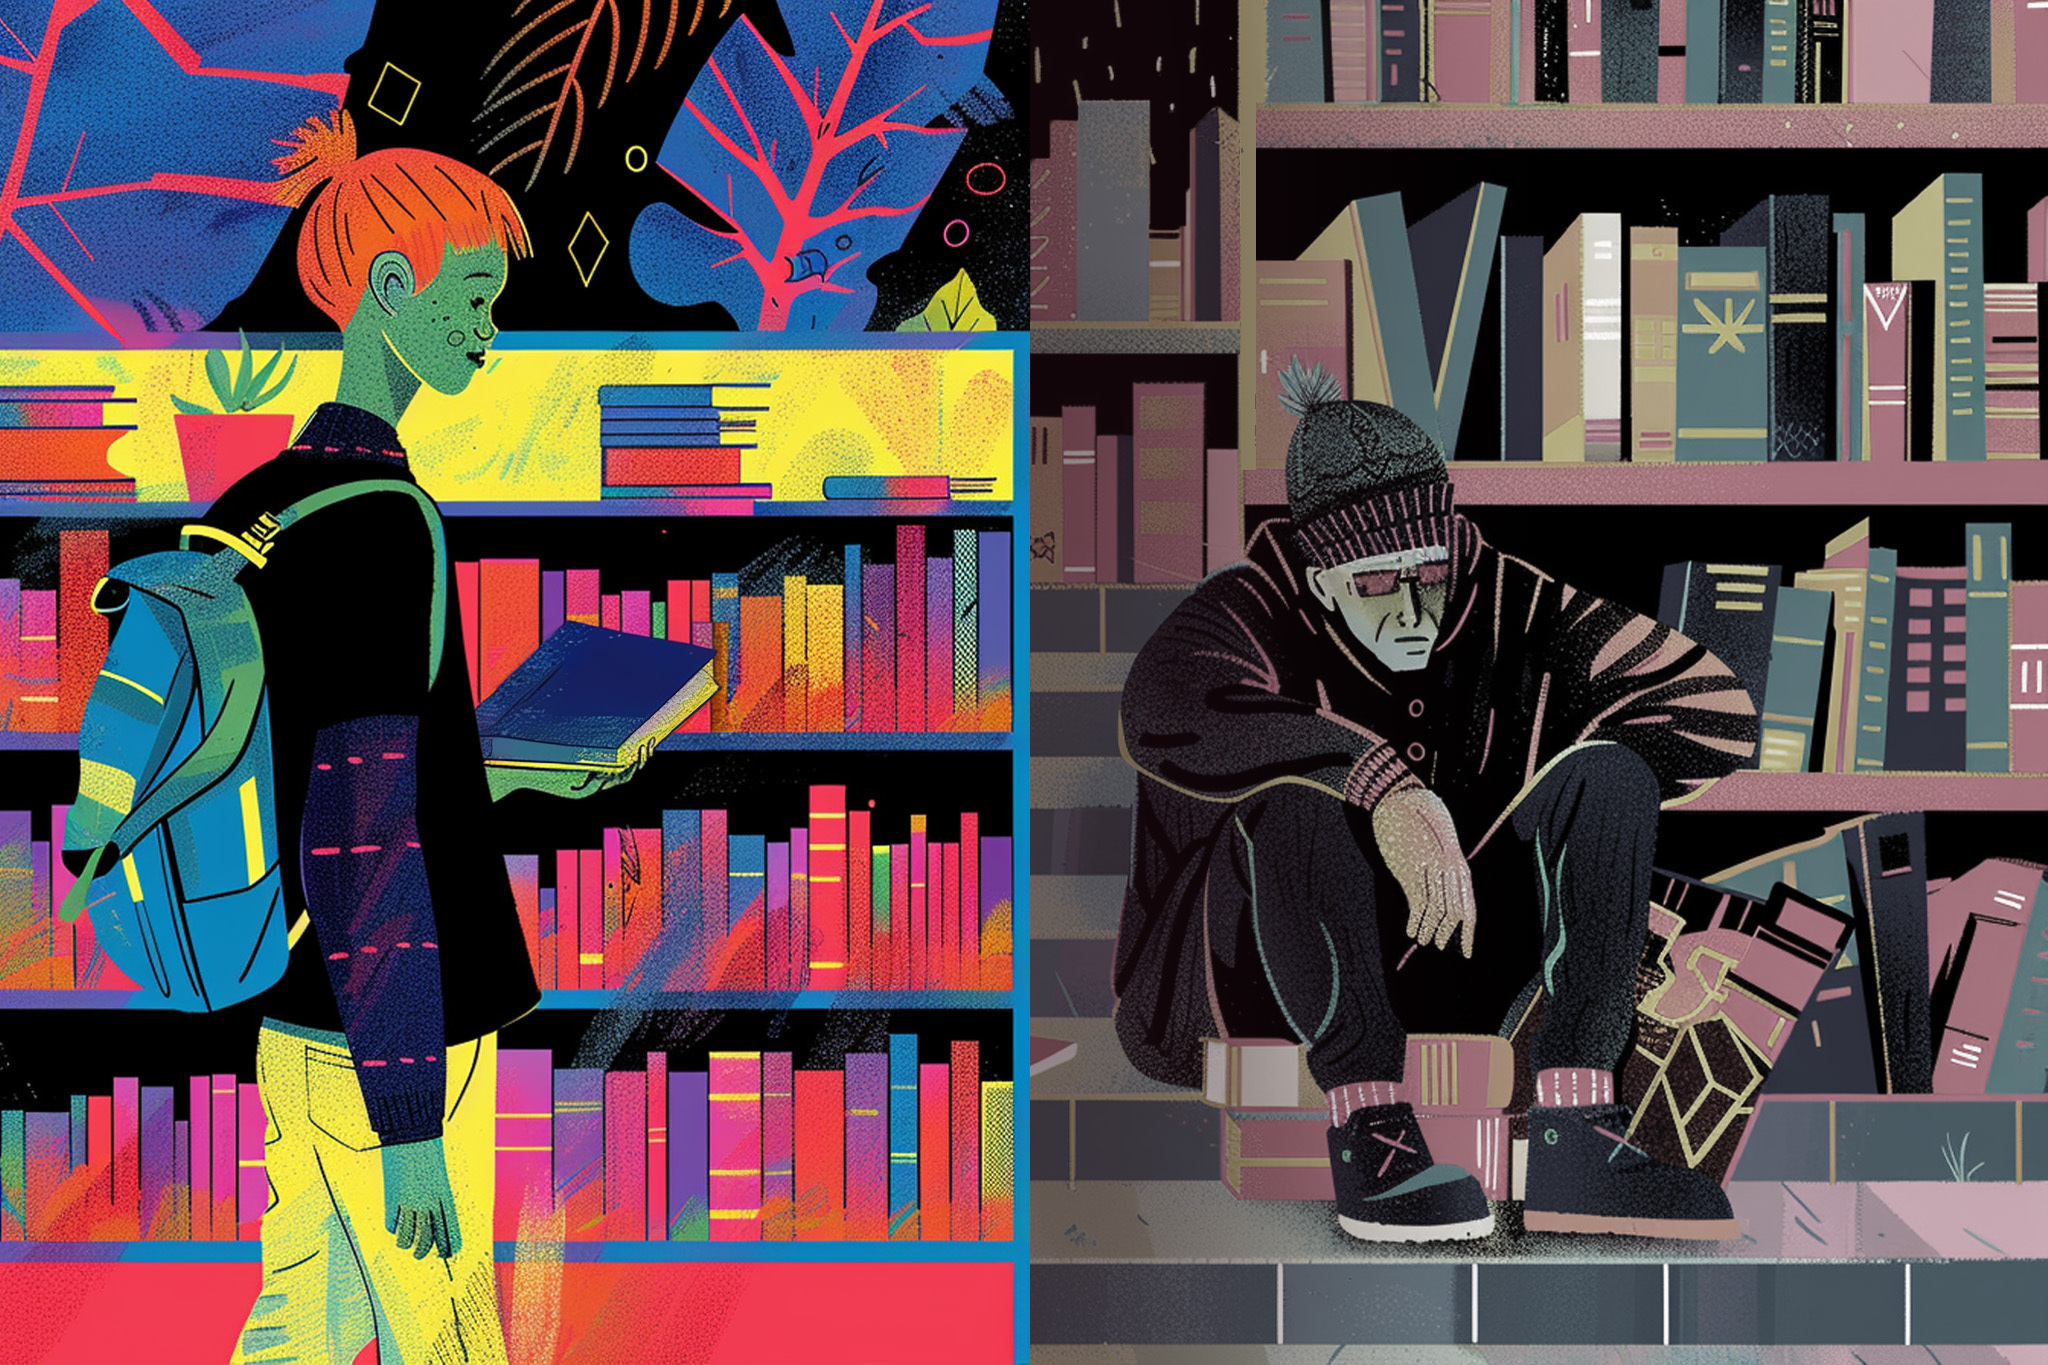 A split illustration showing one side with a person browsing books in a vibrant library, and the other in a darkened space with a person seated, surrounded by fallen books.